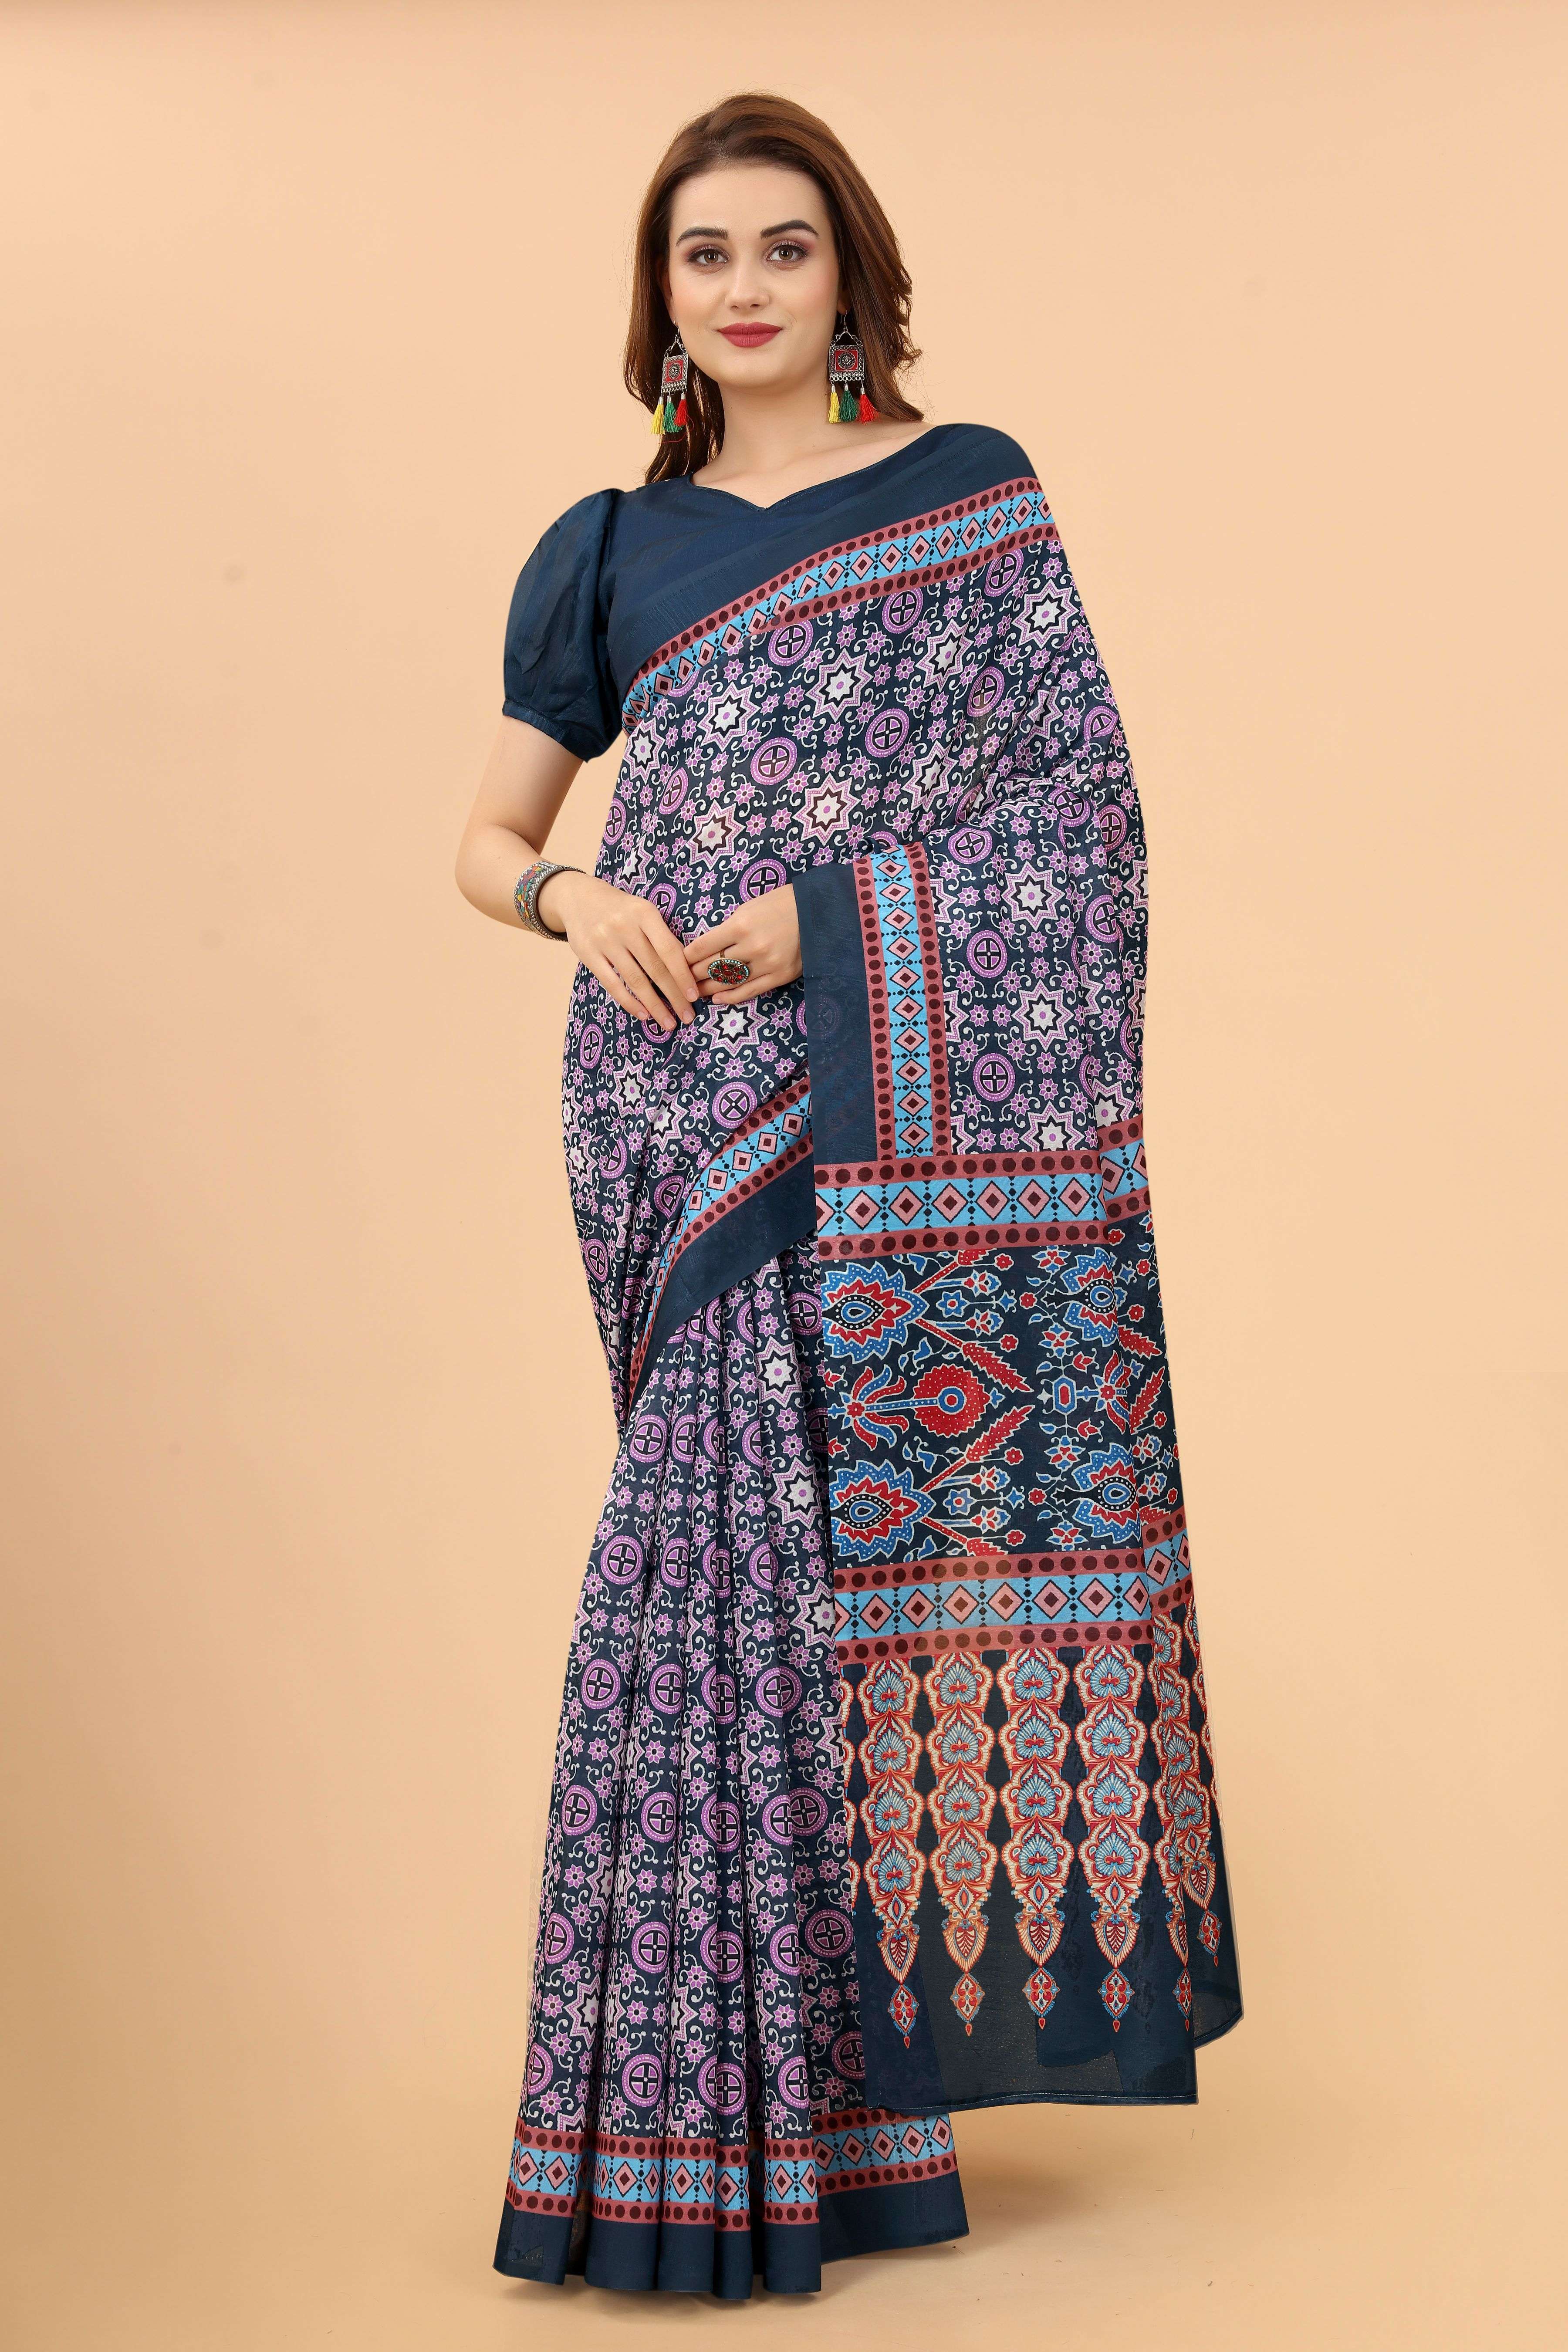 FC presents New Vichitra Printed Sarees Catalog in wholesale Rate